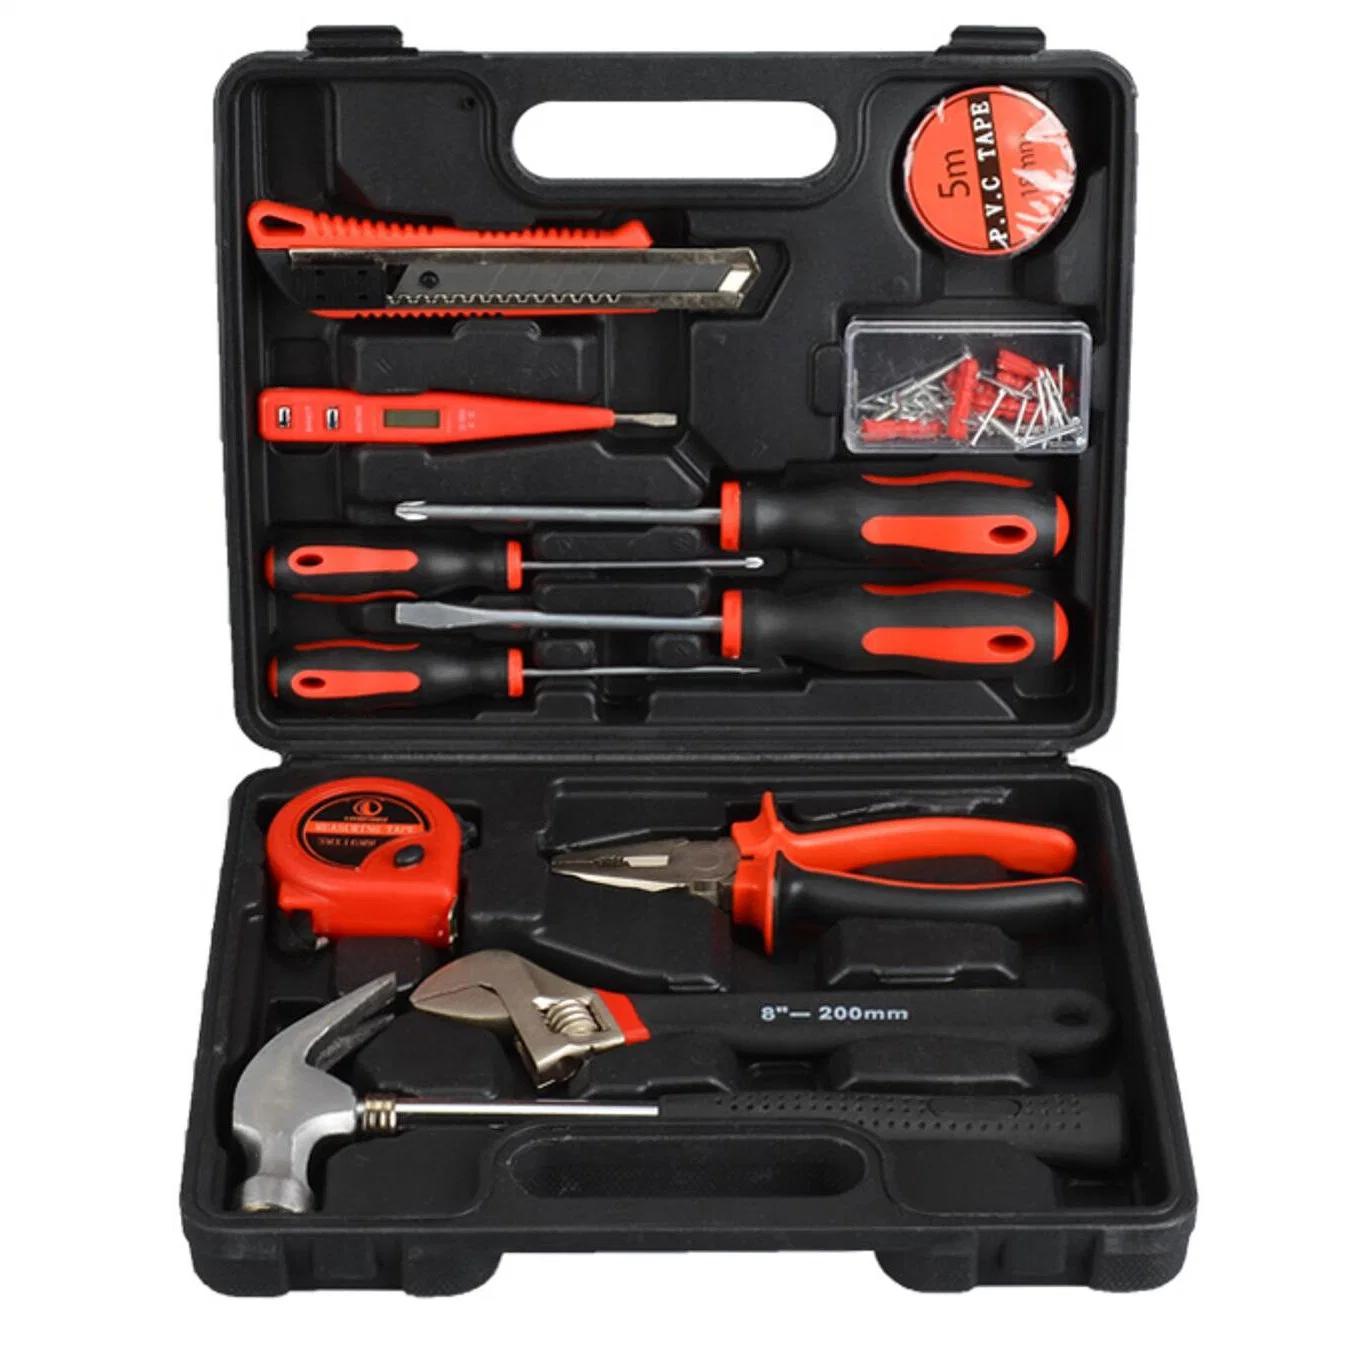 Ylc8613 13PCS Hand Tools Set for Household